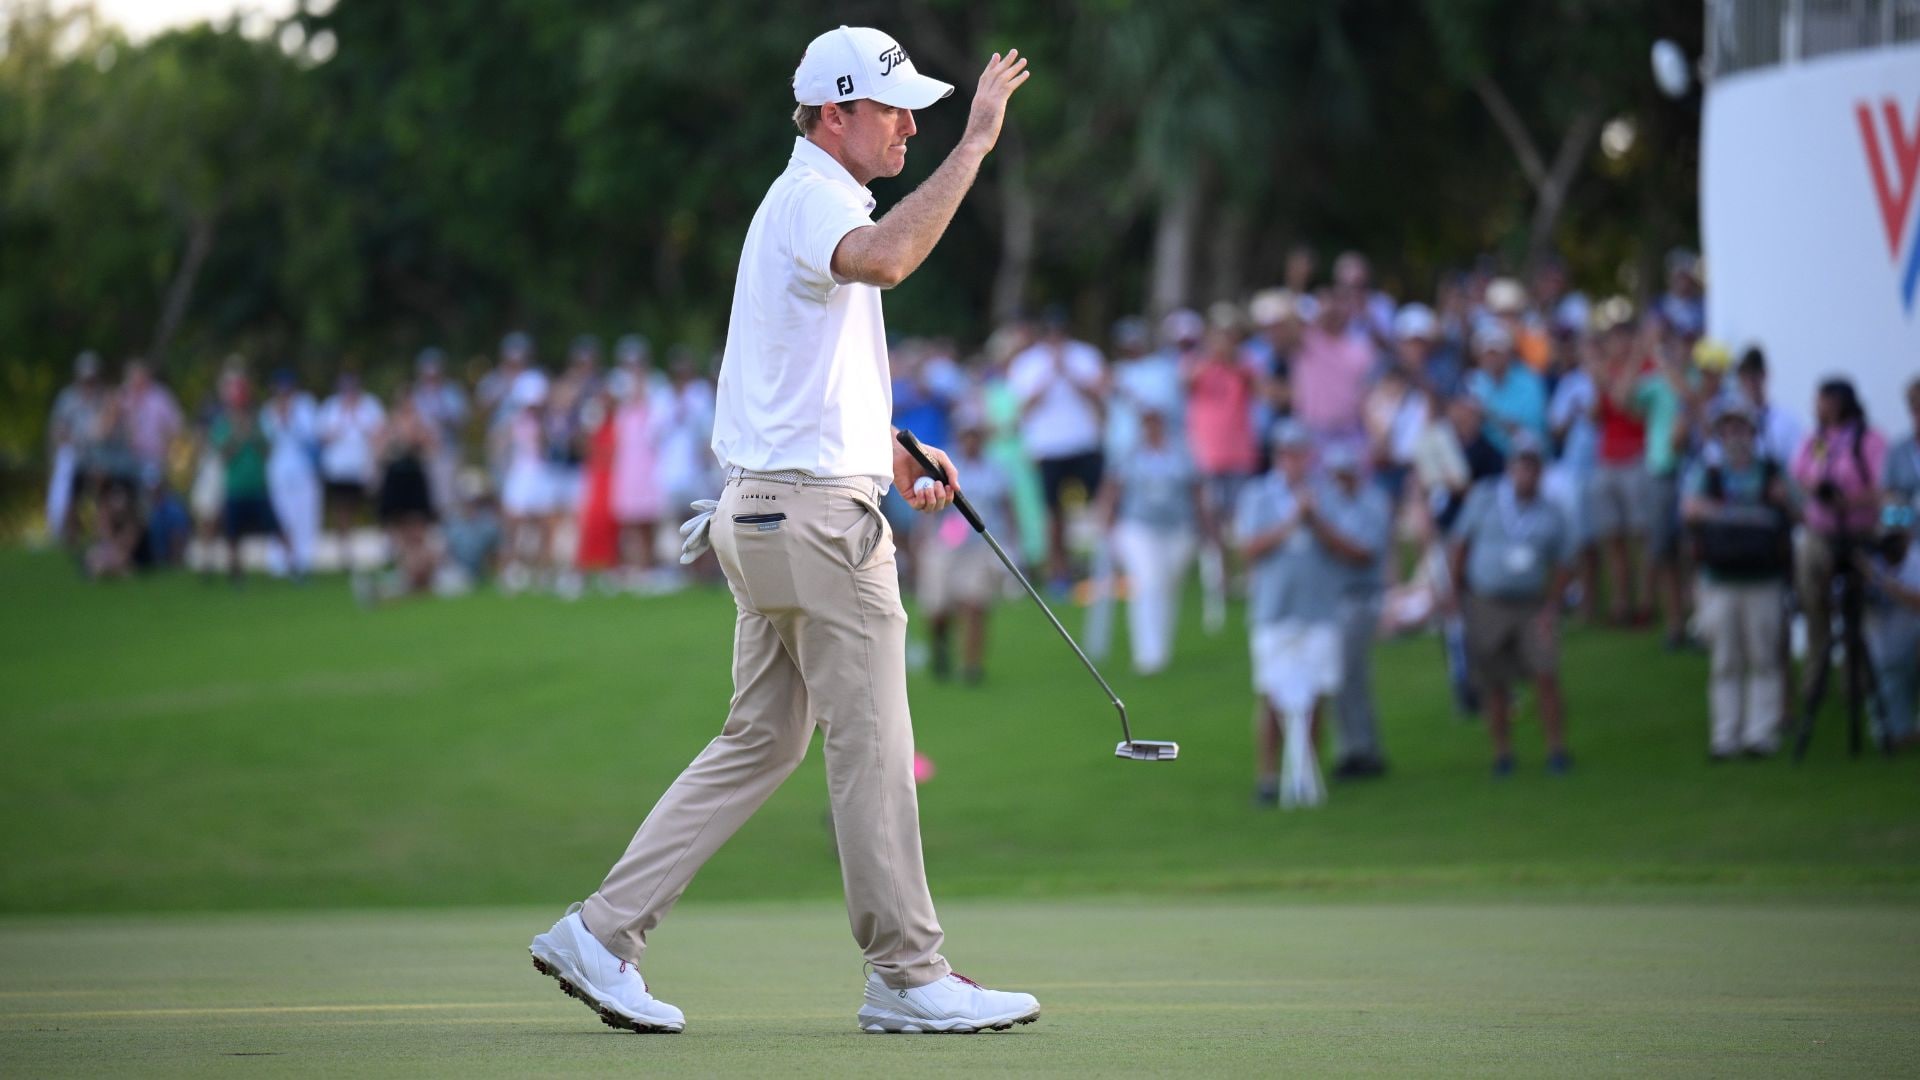 Russell Henley learns from past, finally breaks 54-hole lead woes at Mayakoba